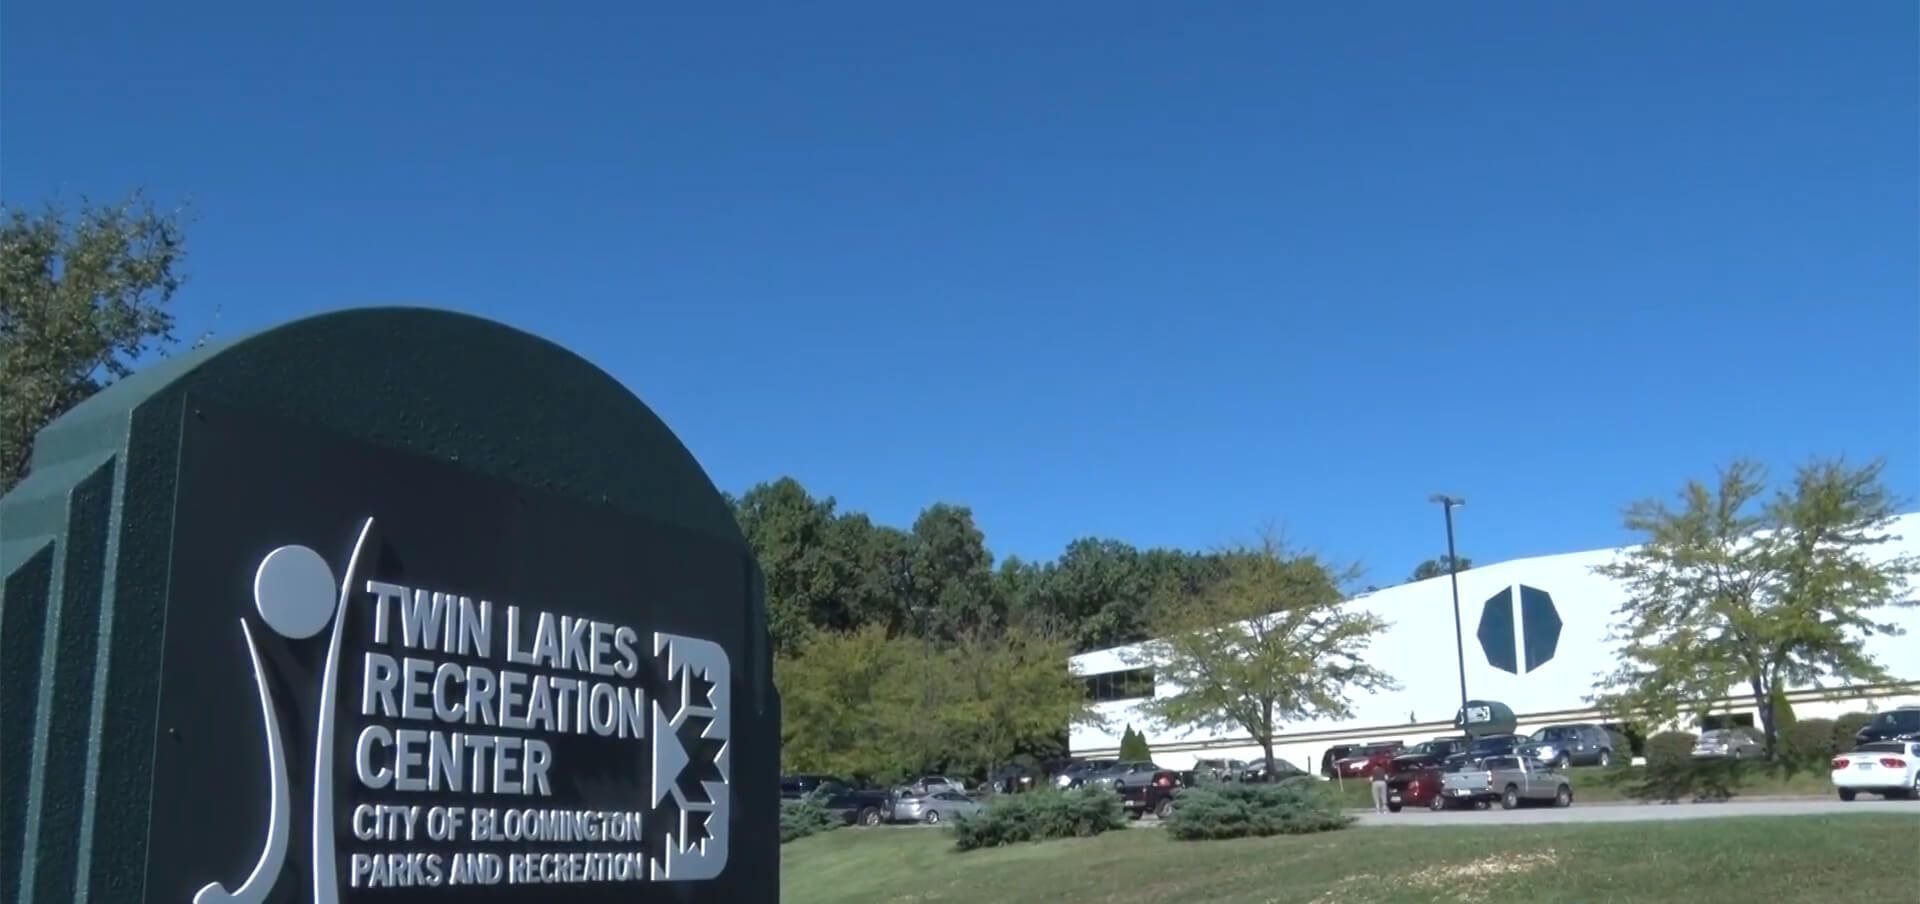 Twin Lakes Recreation Center Marquee and Front